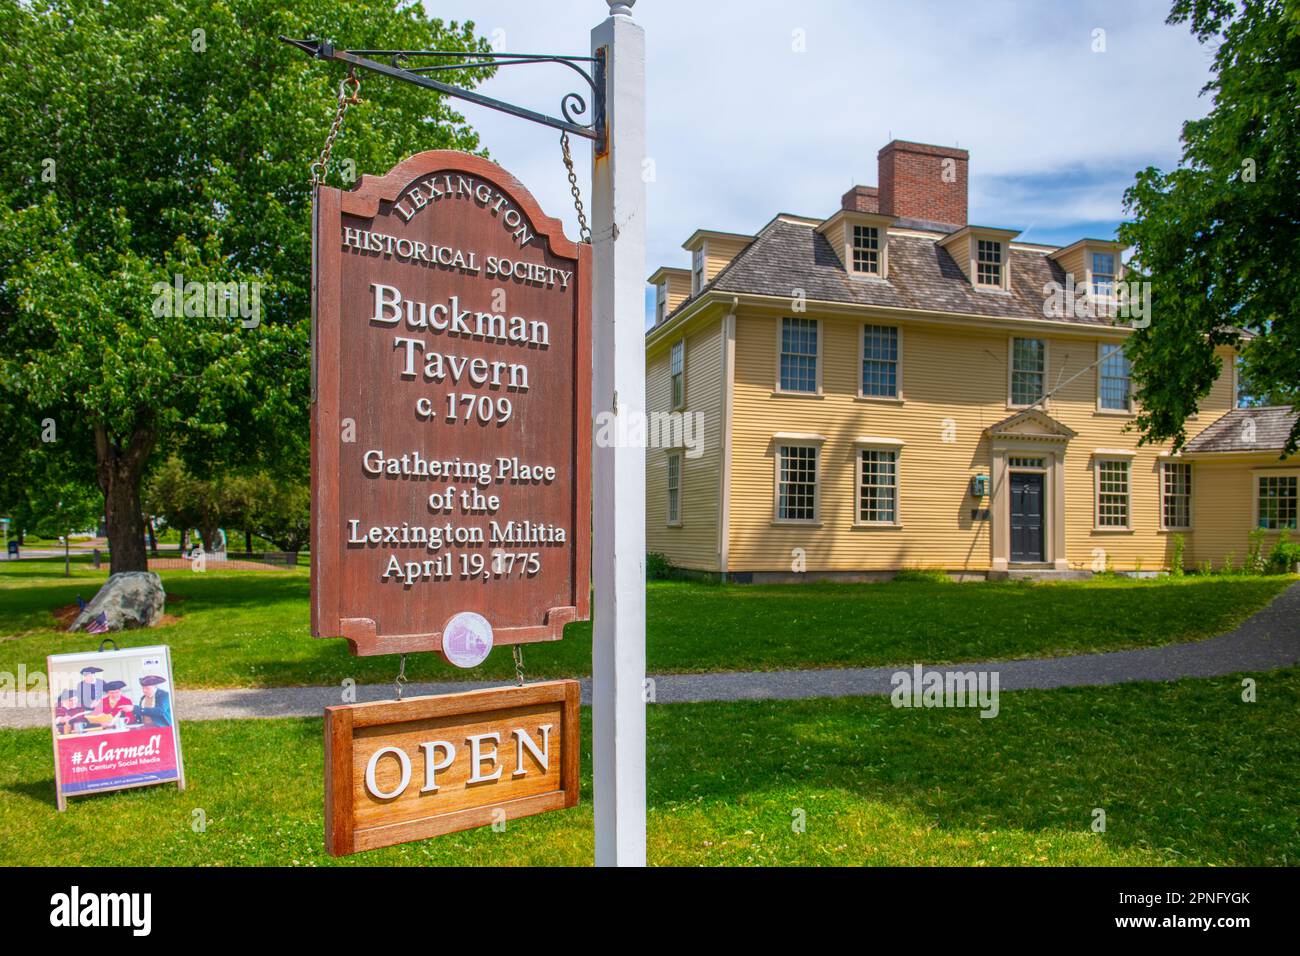 Buckman Tavern is a historic American Revolutionary War site built in 1710 at 1 Bedford Street in historic town center of Lexington, Massachusetts MA, Stock Photo